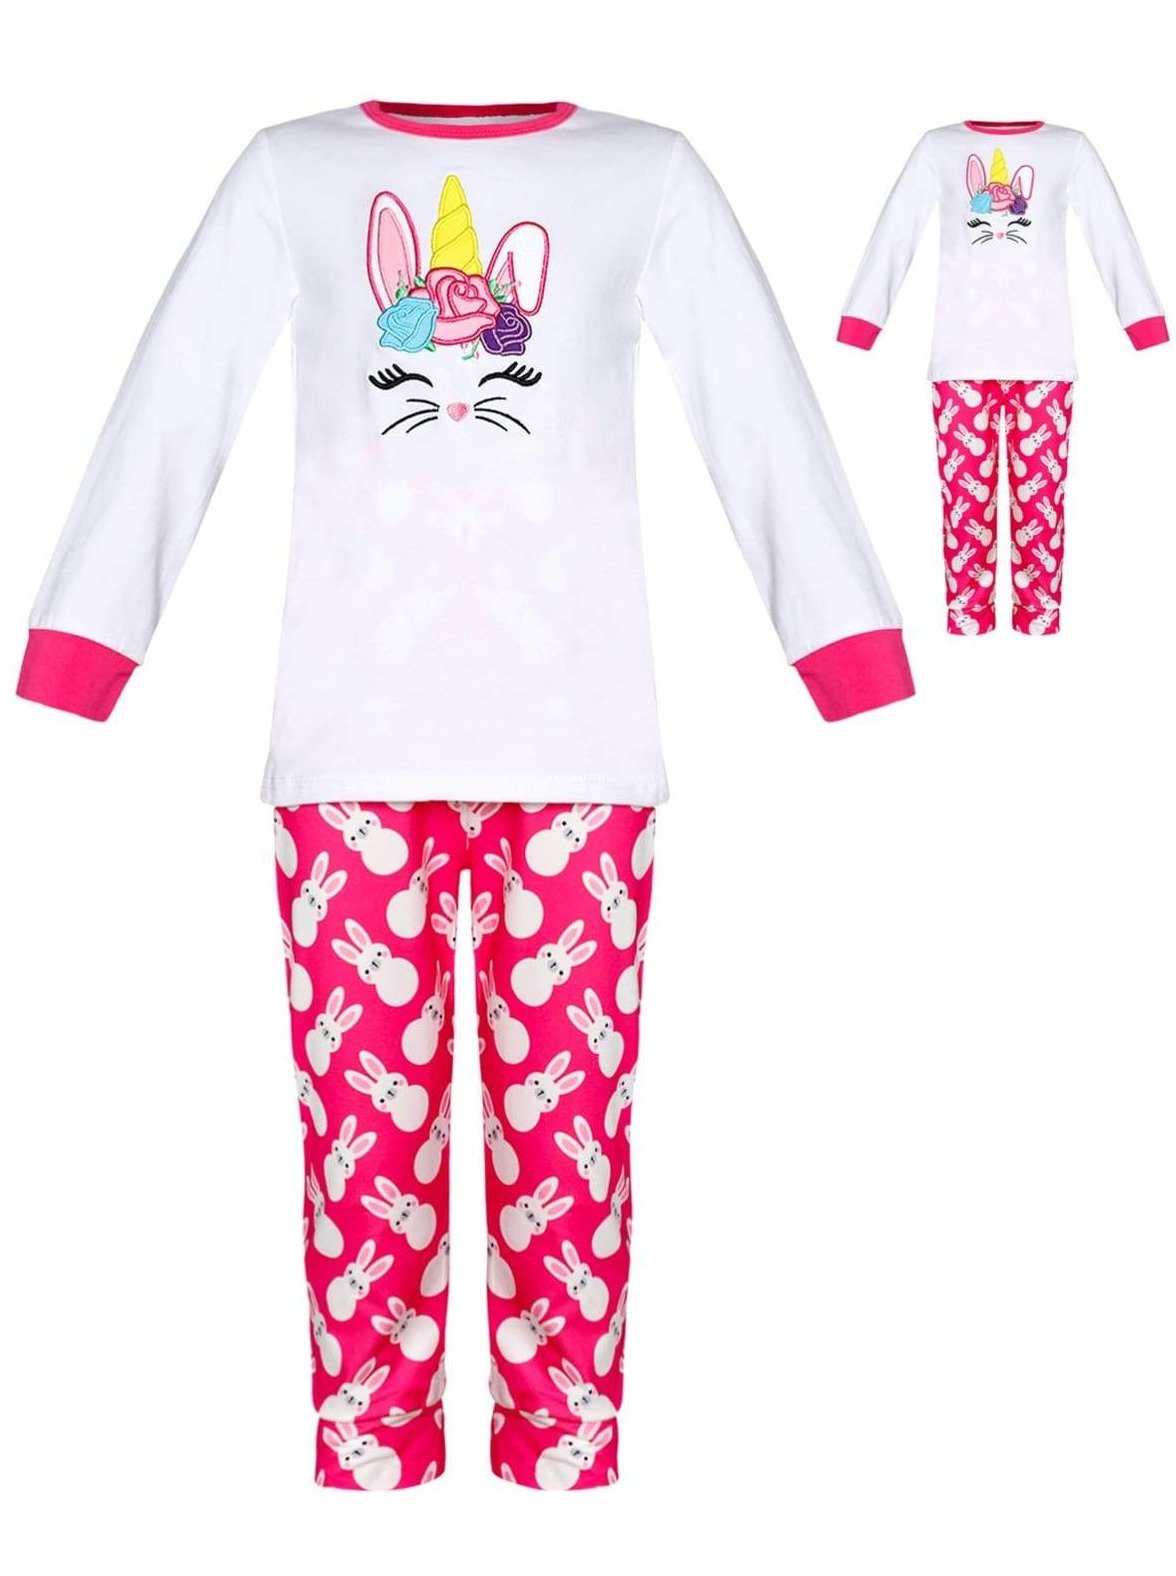 Girls Easter Leggings Set with Matching Doll Outfit - Mia Belle Girls